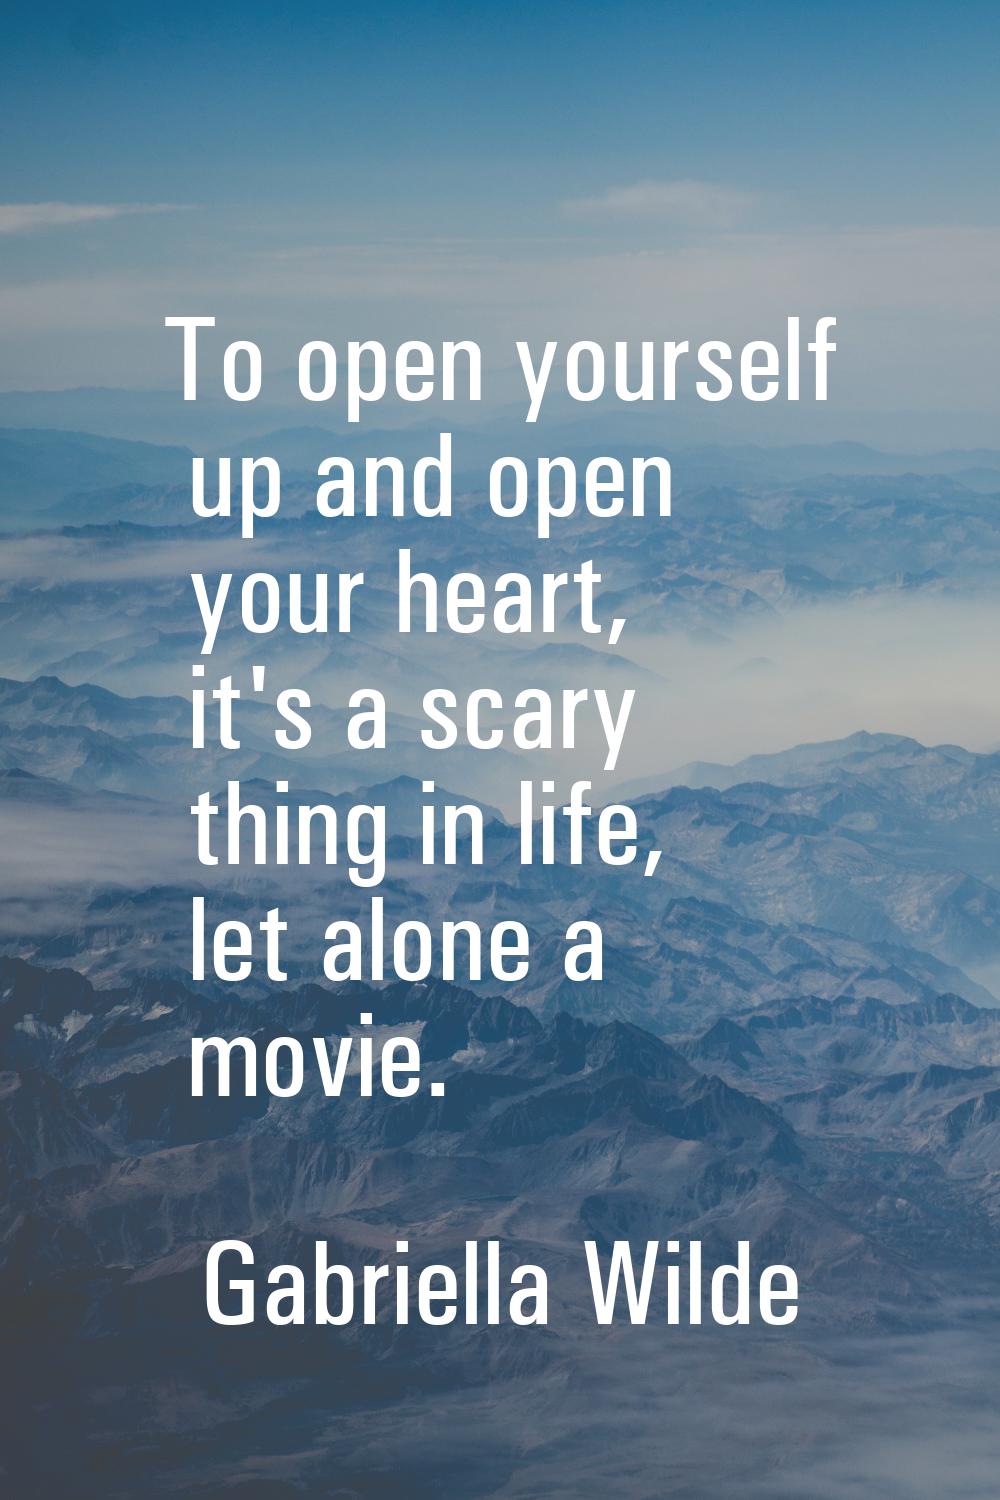 To open yourself up and open your heart, it's a scary thing in life, let alone a movie.